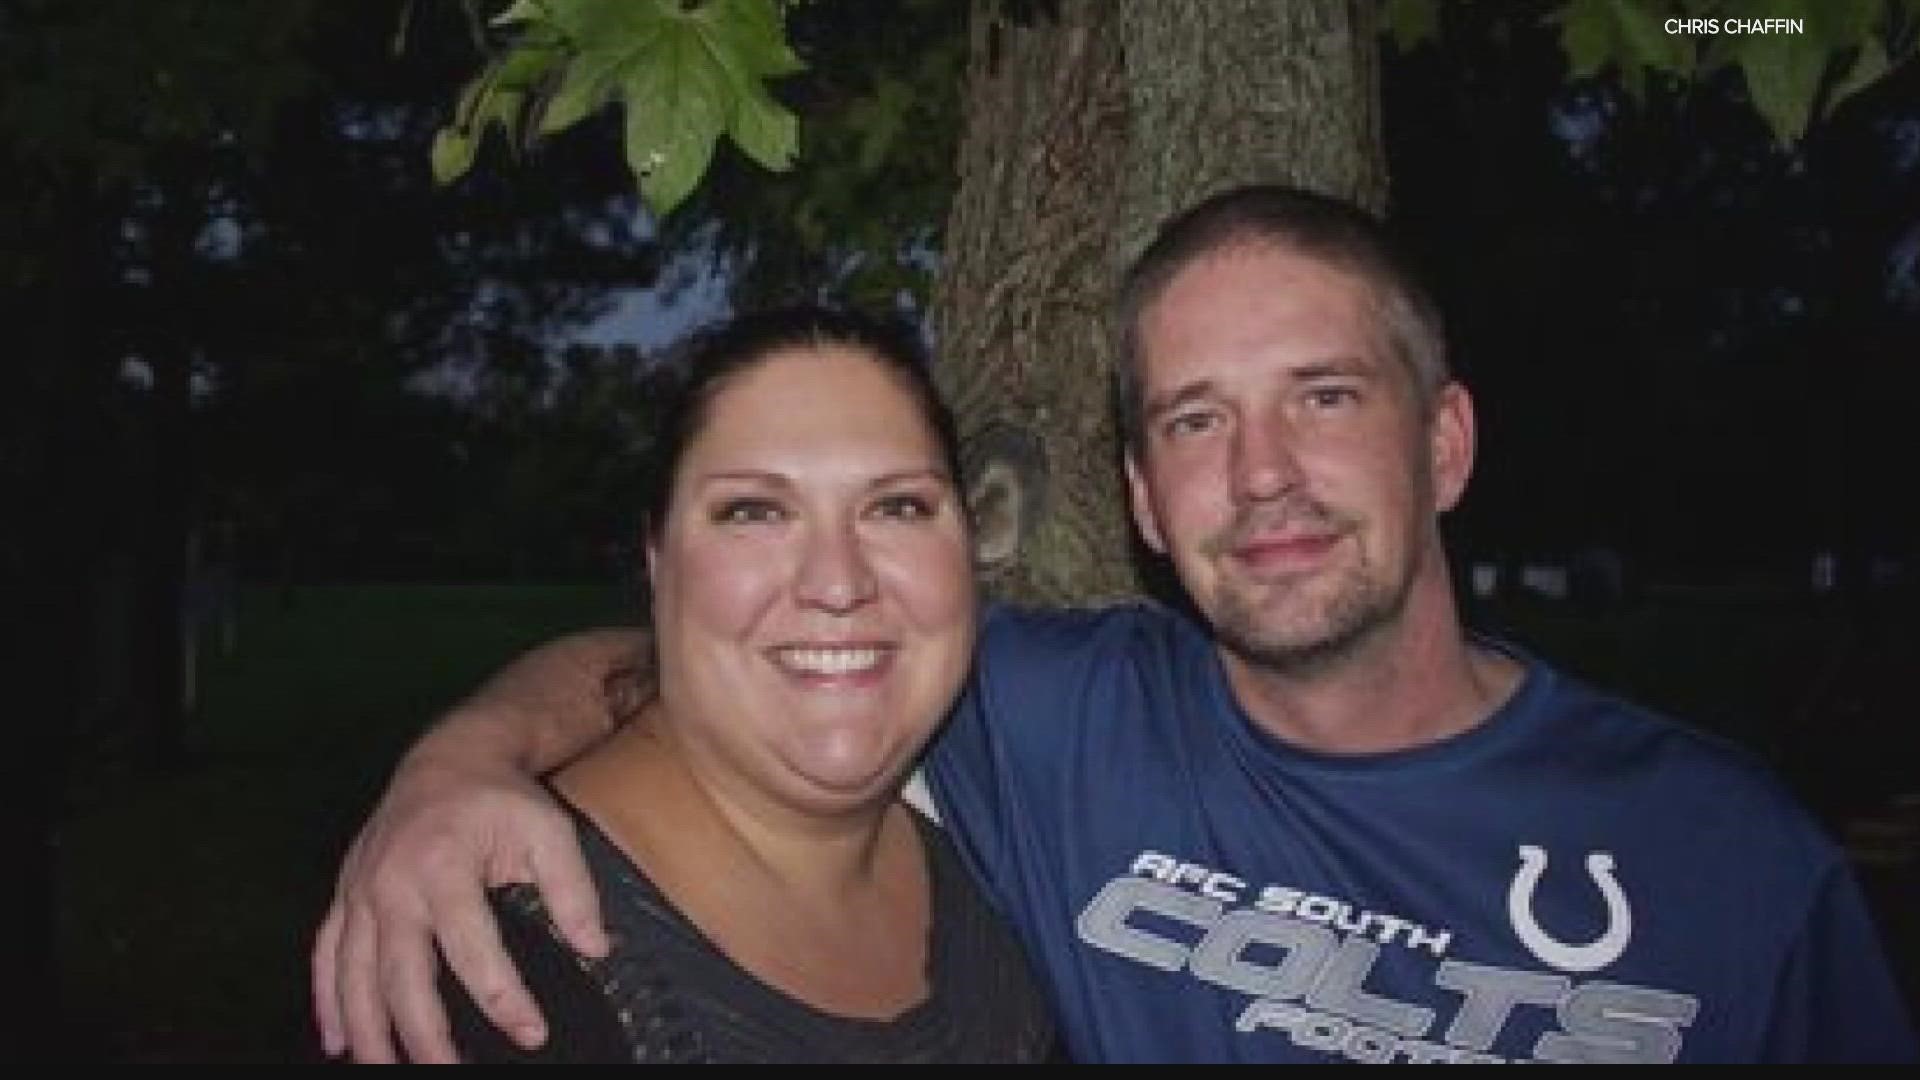 Jason Phipps was found guilty of voluntary manslaughter in the July 20-20 shooting death of his wife Jill.